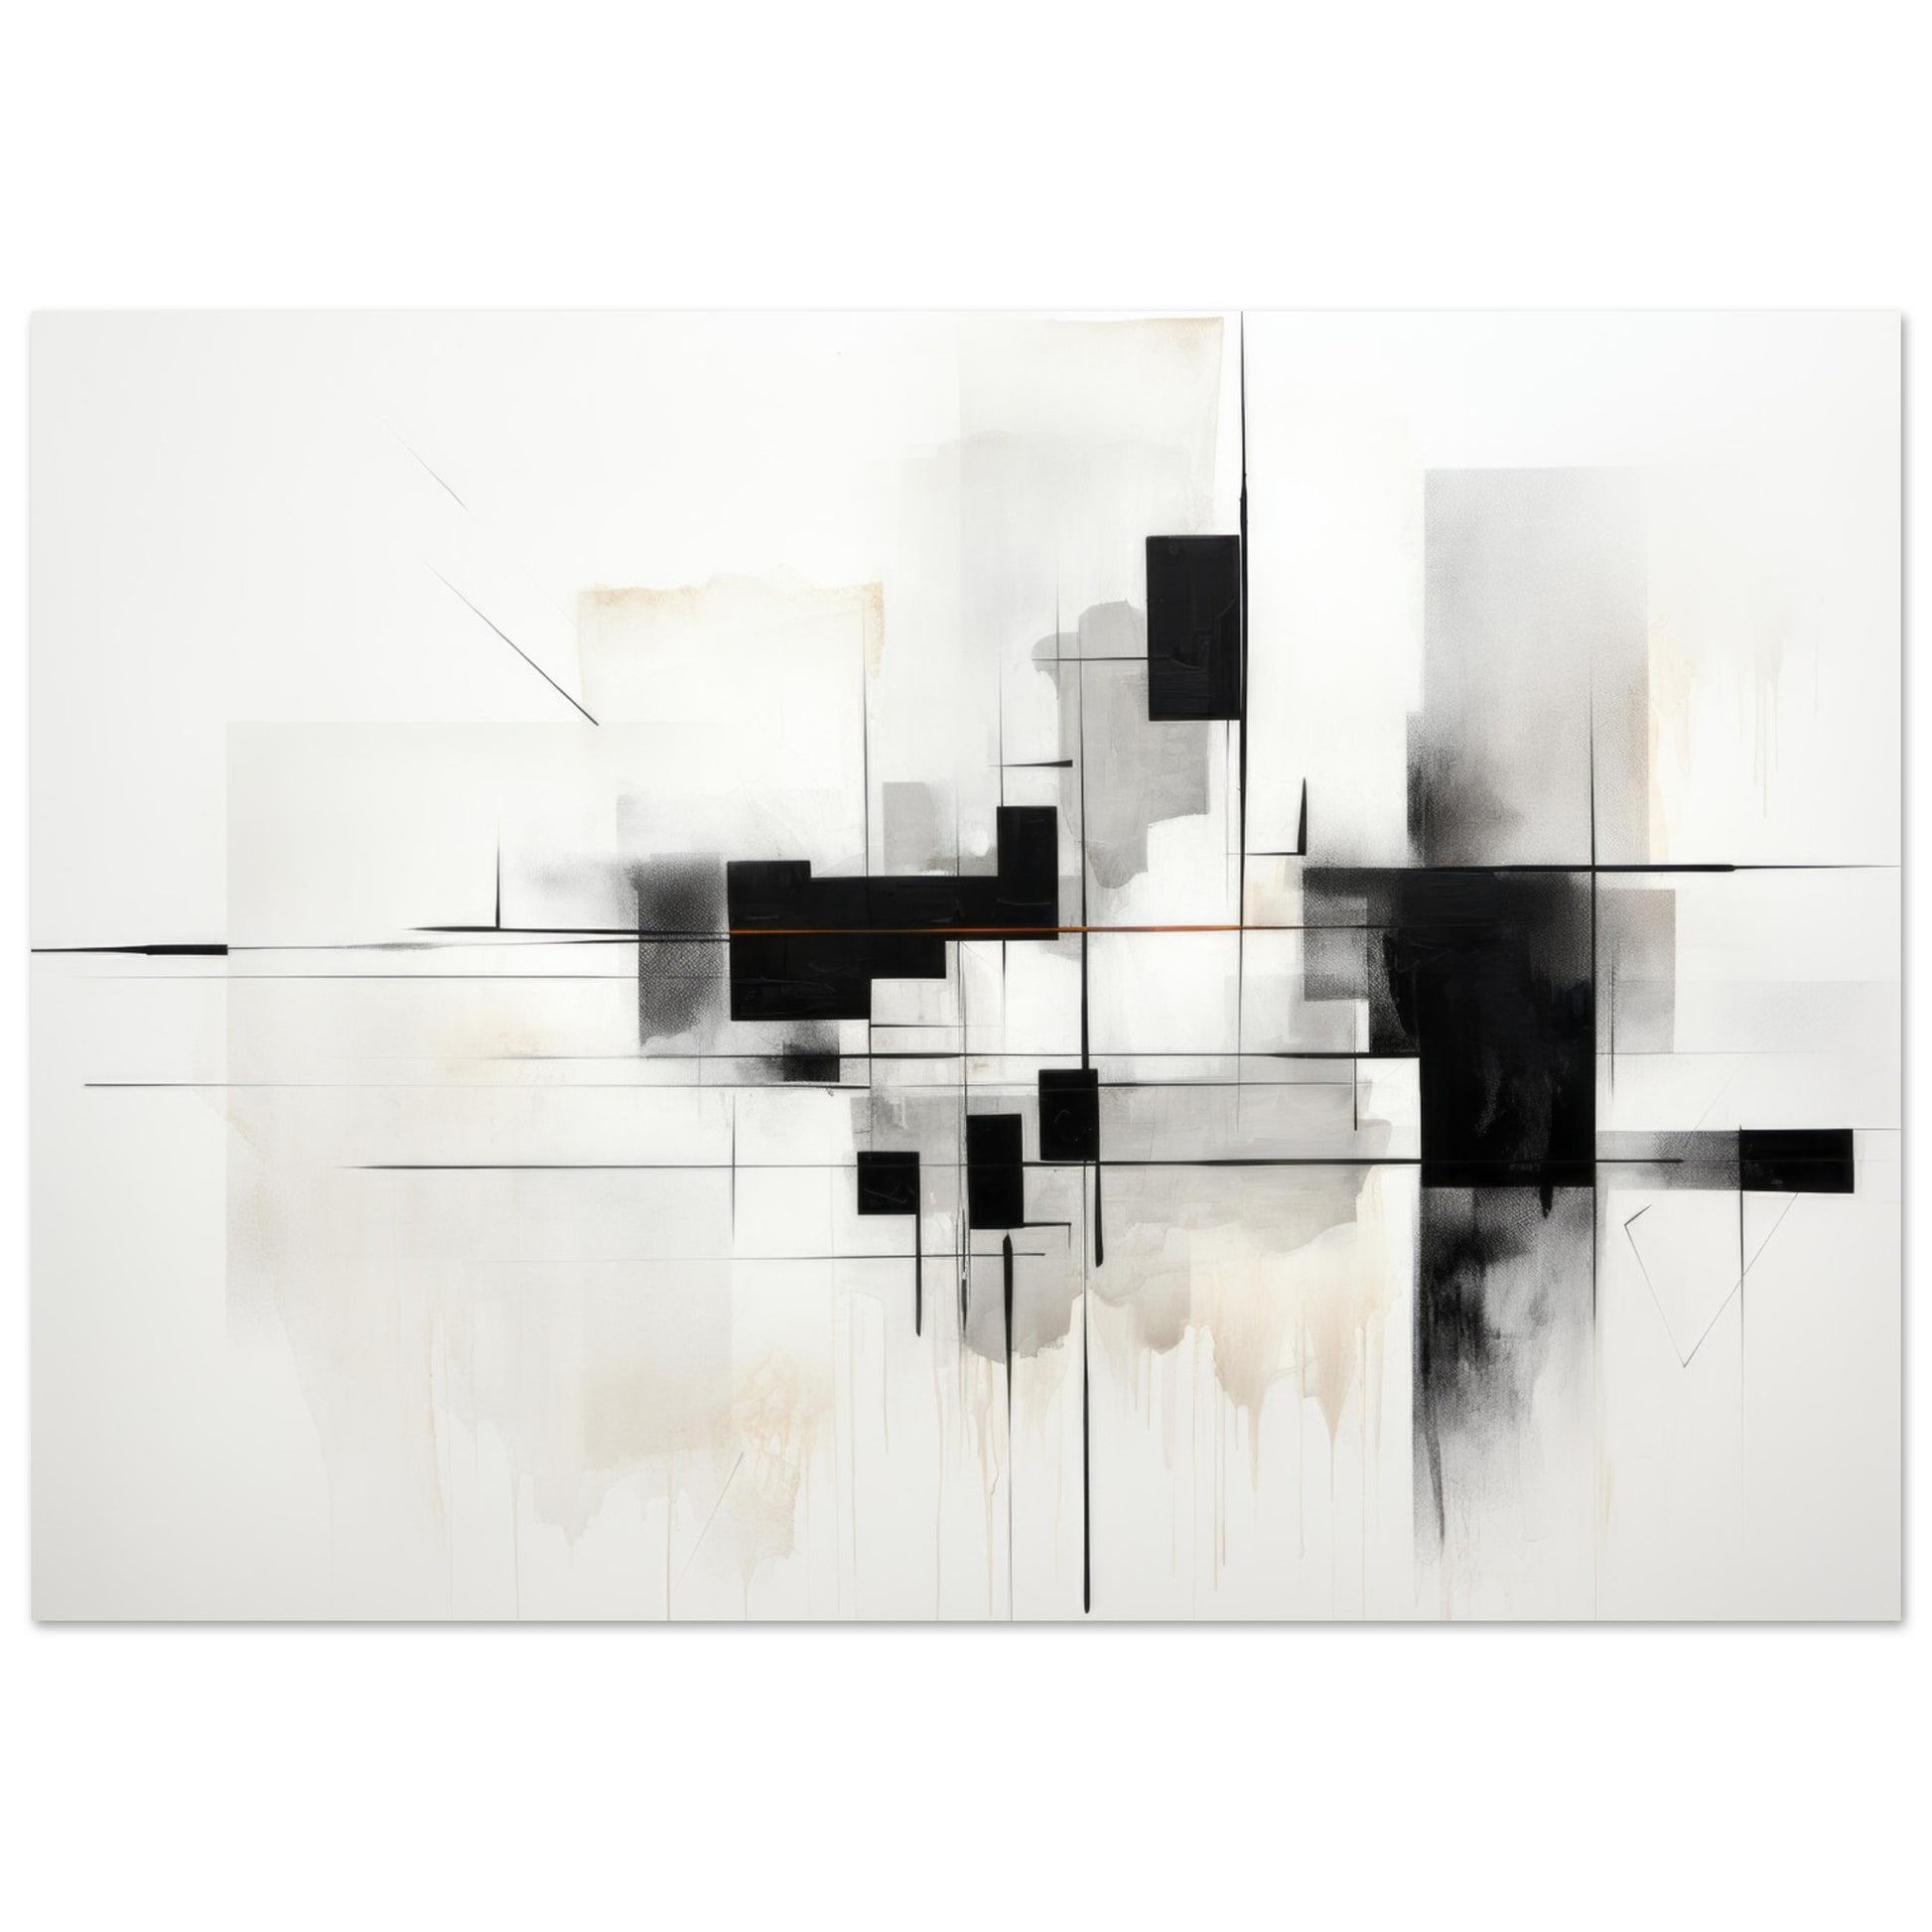 Black and white art print titled "Black Mirror" showcasing geometric shapes, intersecting lines, and a dripping effect at the bottom.